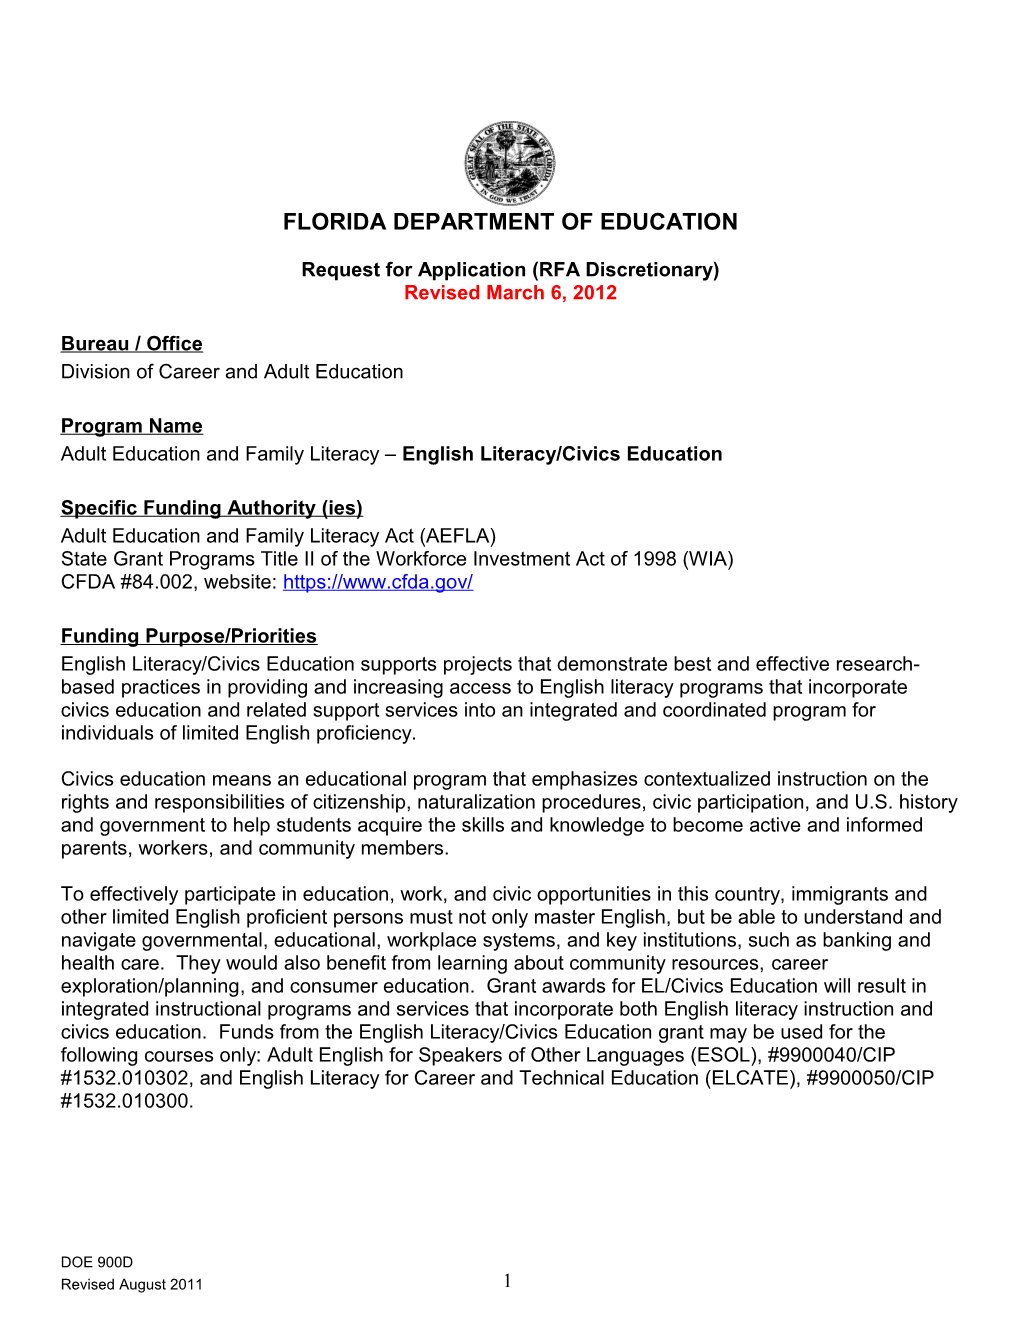 Florida Department of Education s6